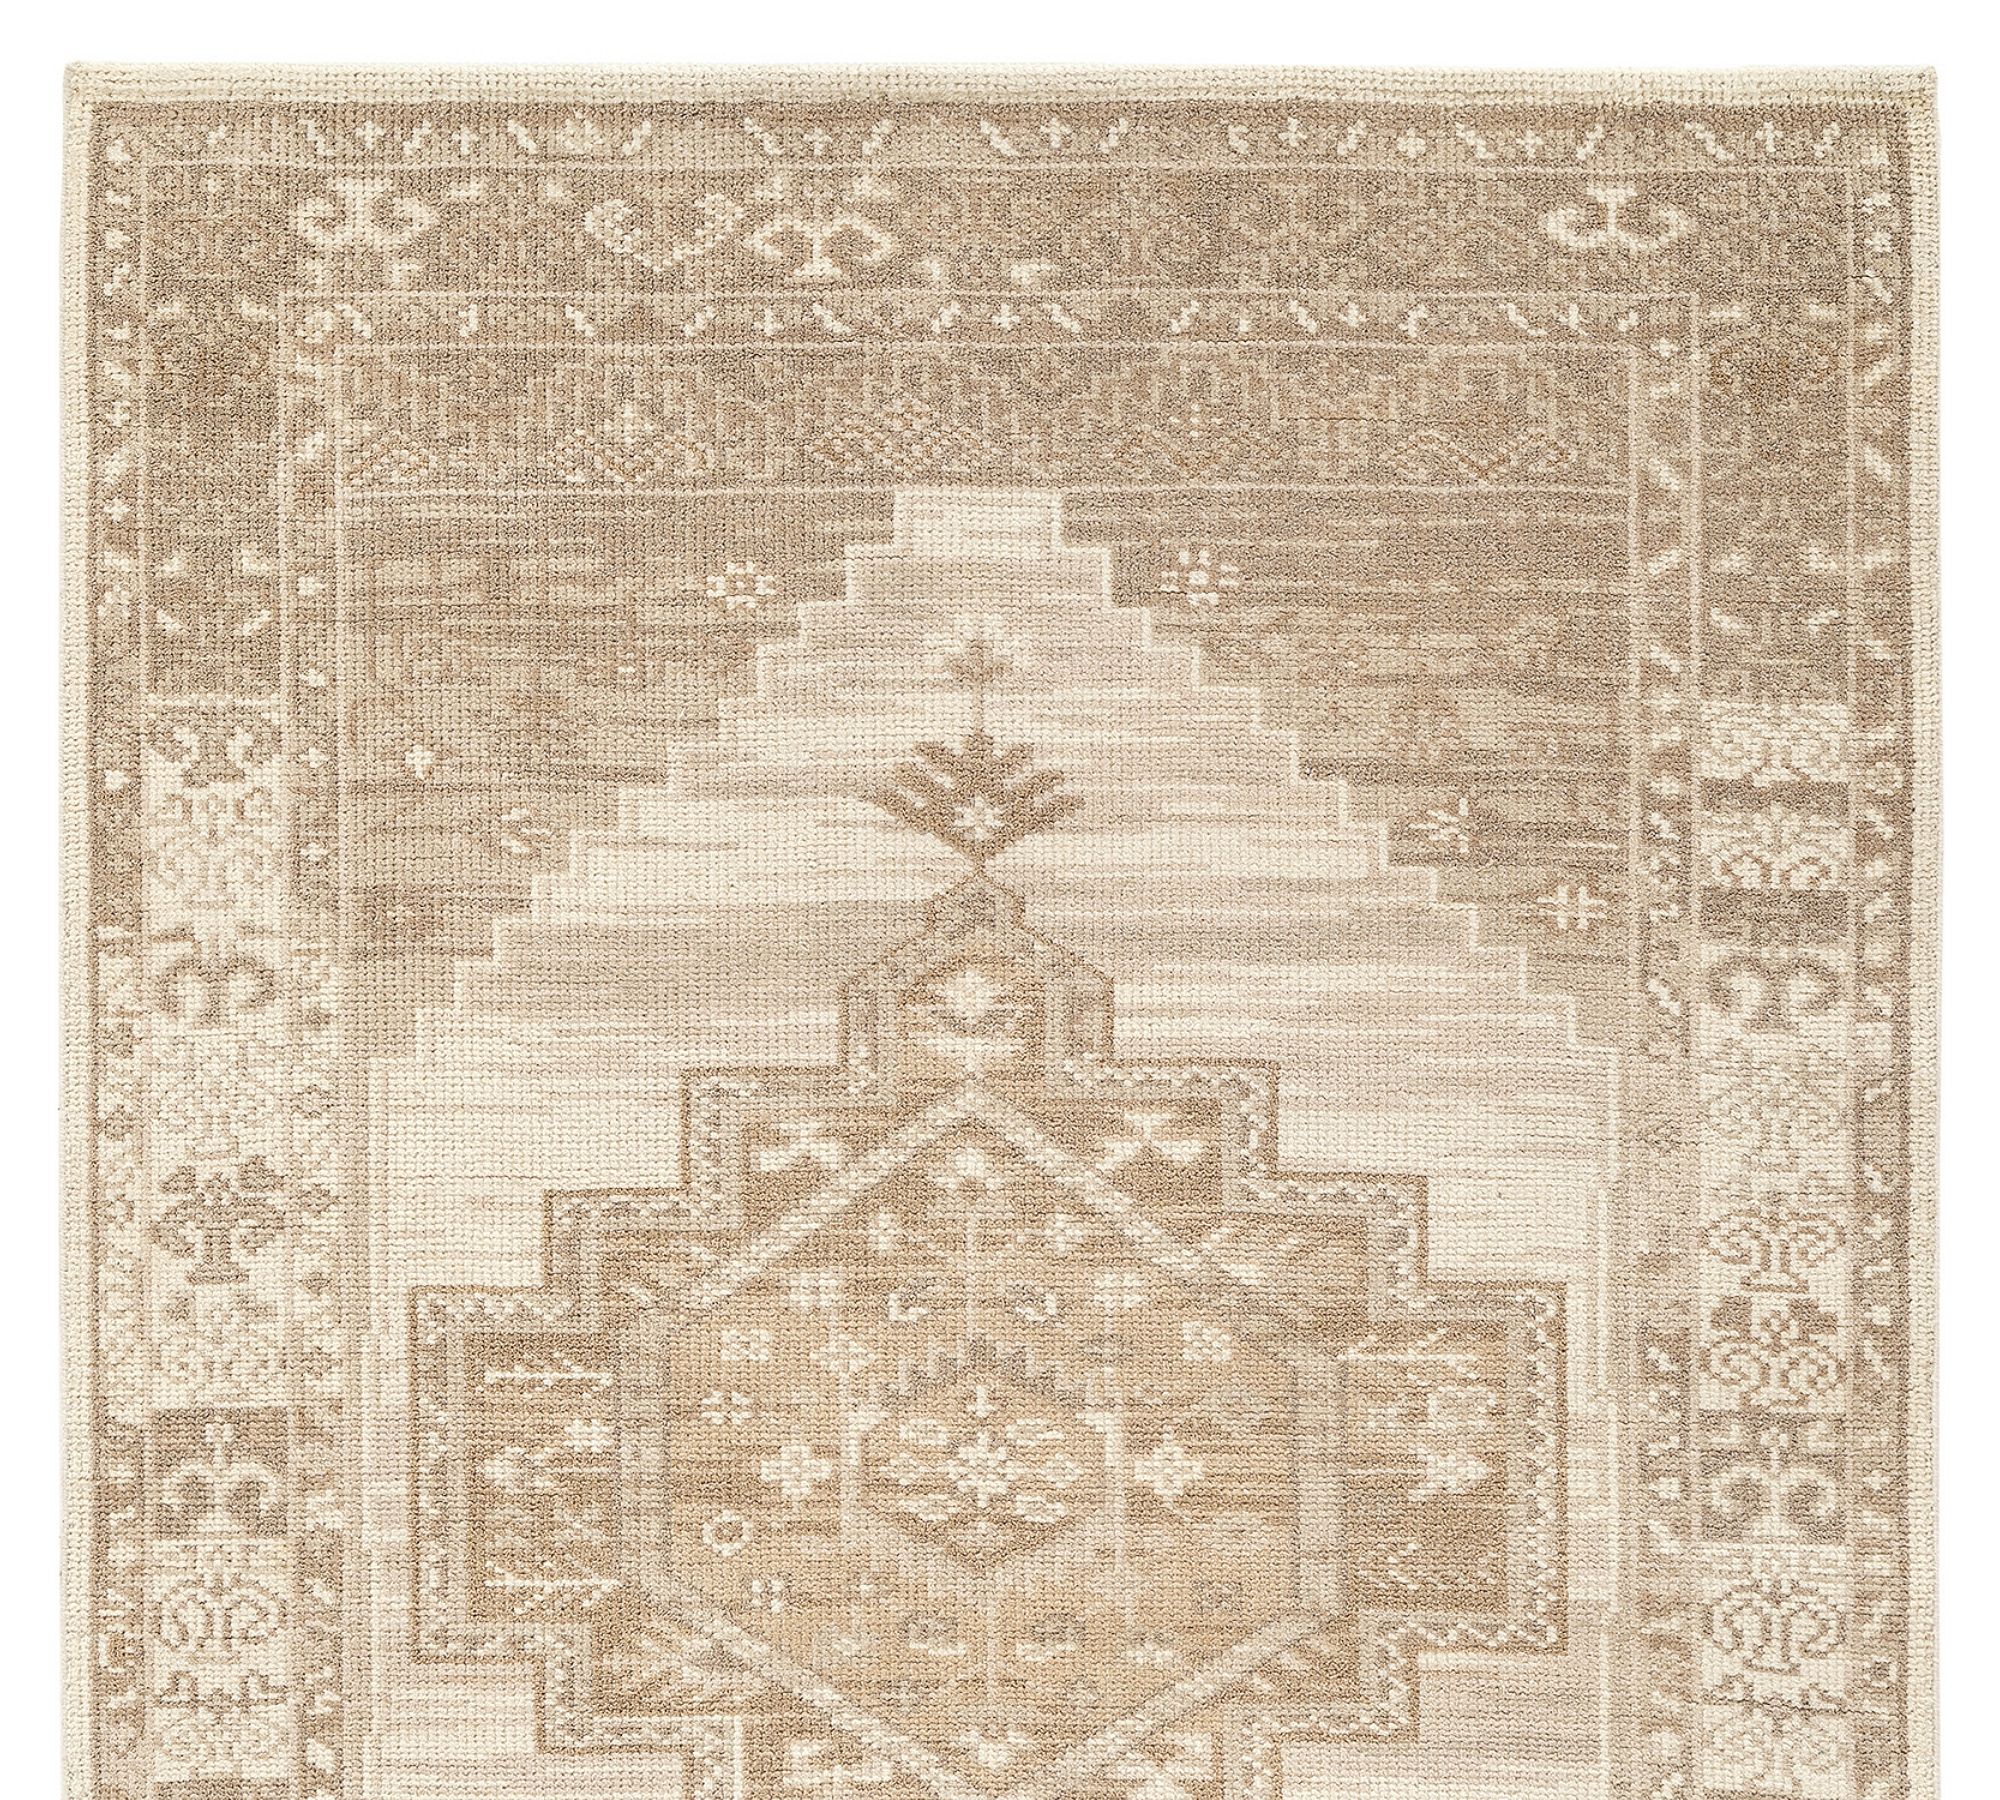 Alena Handknotted Rug Swatch - Free Returns Within 30 Days